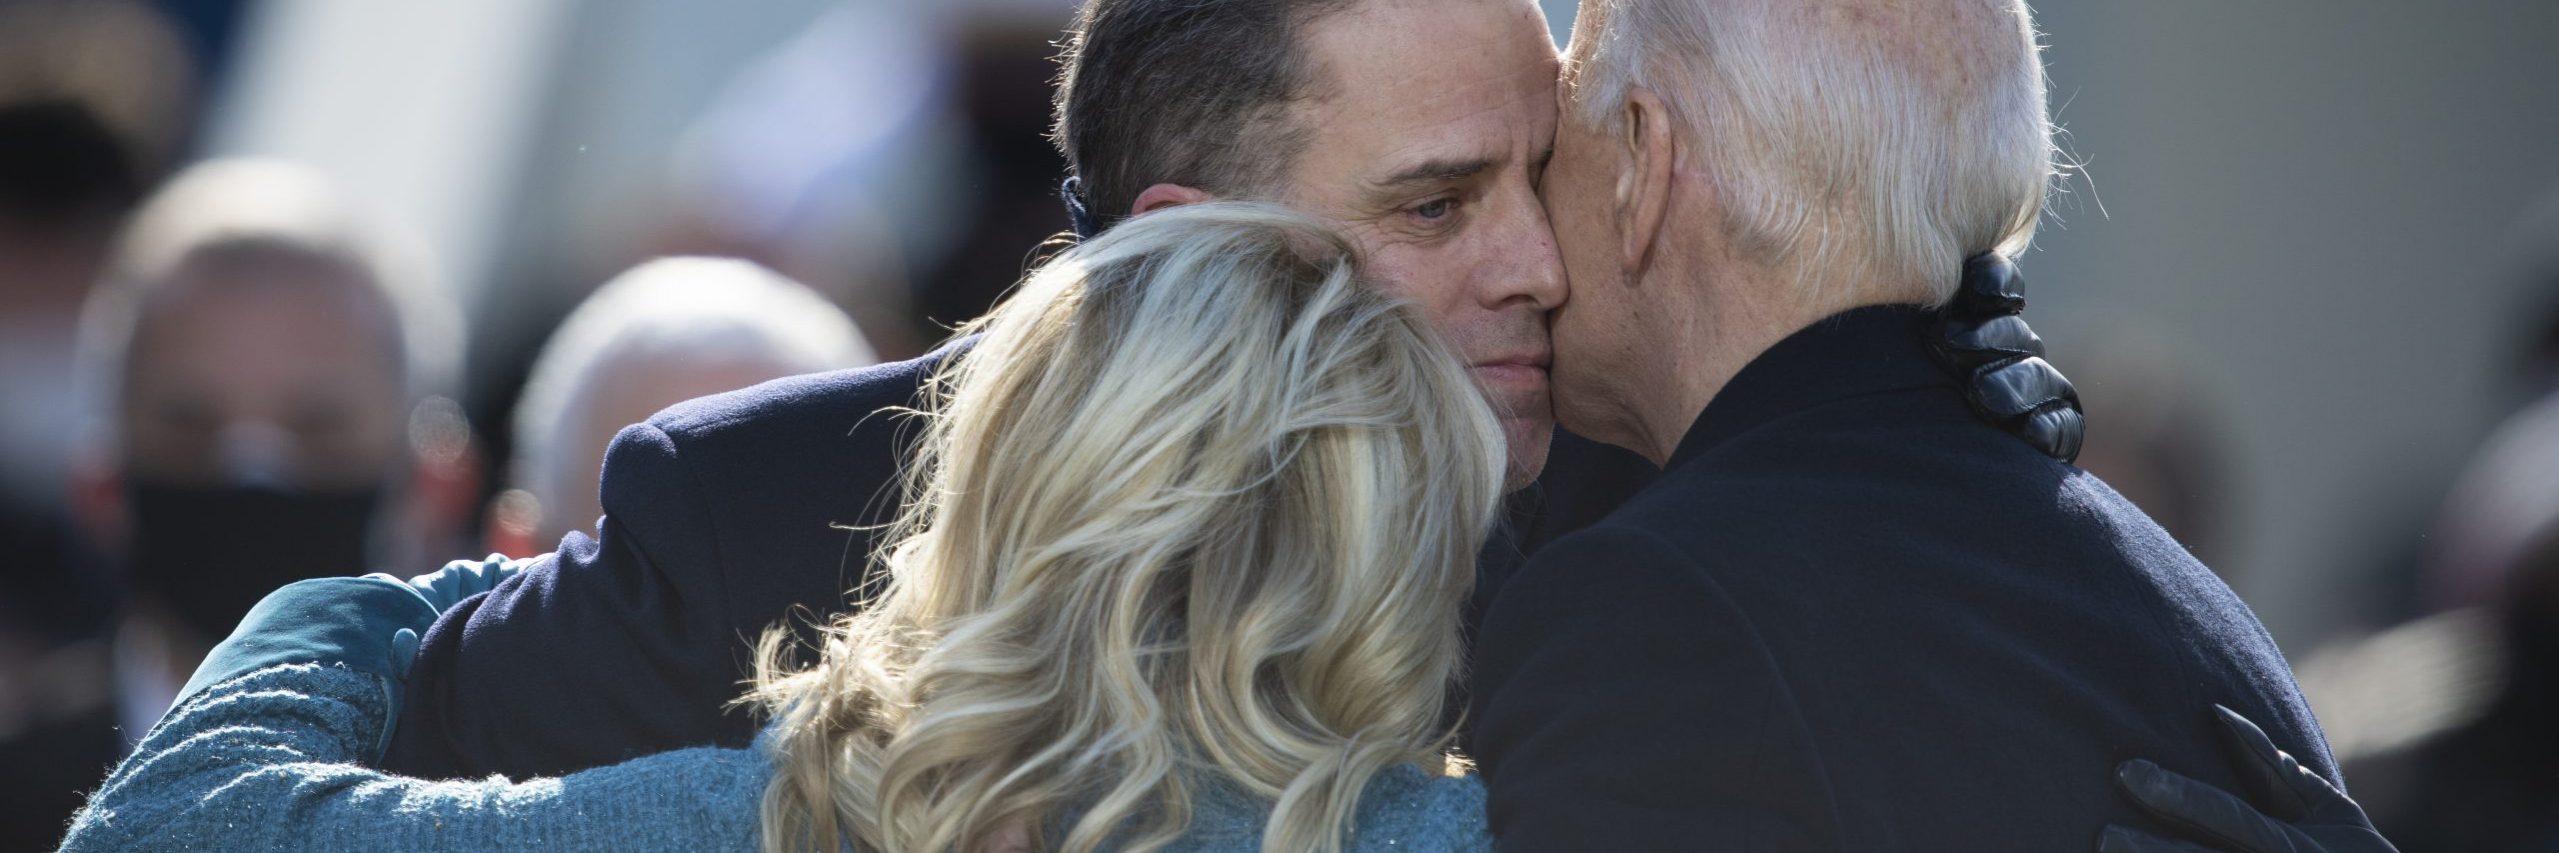 An image of US President Joe Biden hugging his family during the 59th Presidential Inauguration ceremony in Washington, Jan. 20, 2021. Image source: Chairman of the Joint Chiefs of Staff, via Wikimedia Commons